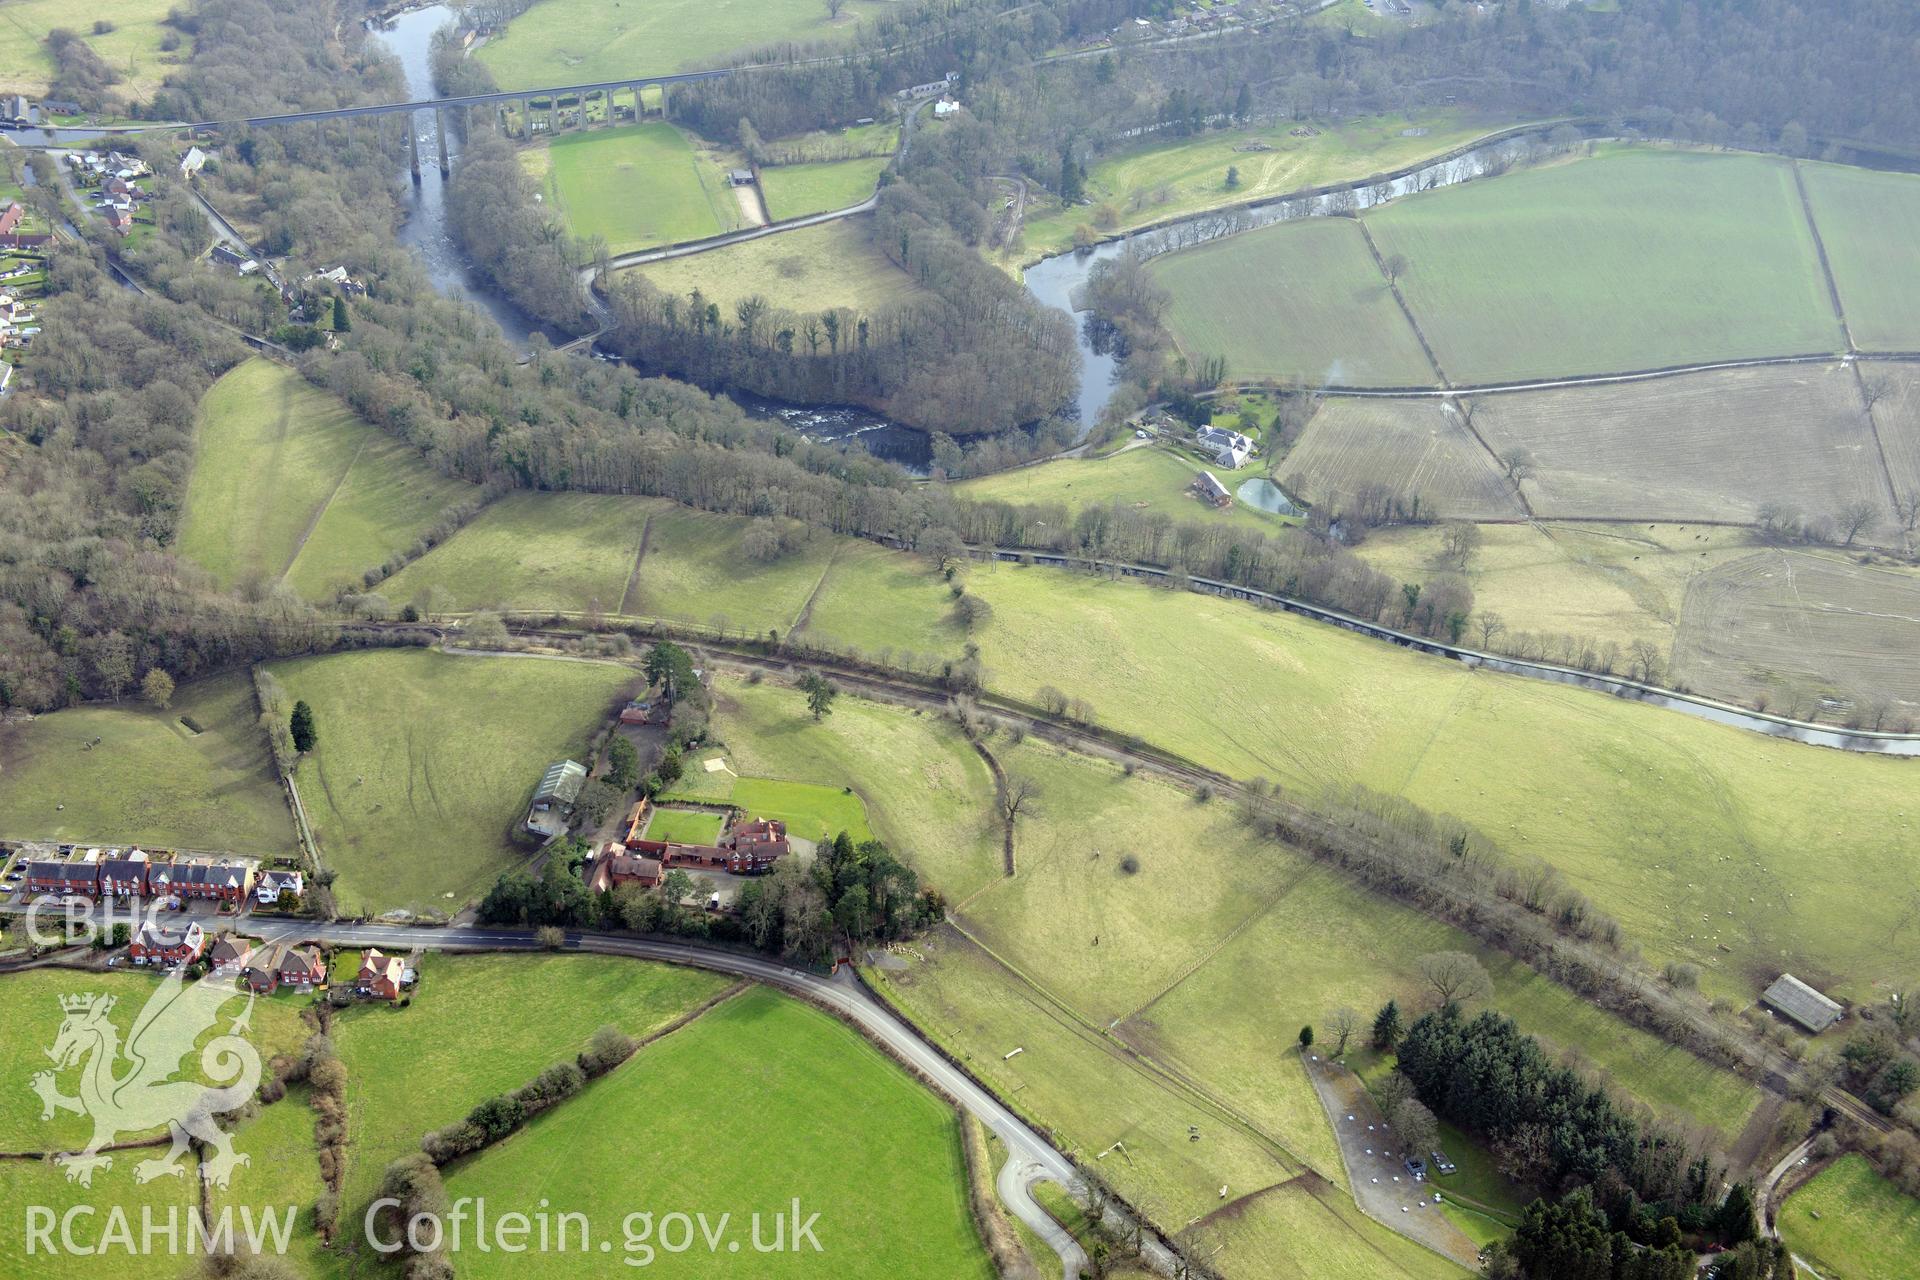 Llangollen Canal, Pontcysyllte Aqueduct and Bryn-Oerog garden, Llangollen. Oblique aerial photograph taken during the Royal Commission?s programme of archaeological aerial reconnaissance by Toby Driver on 28th February 2013.